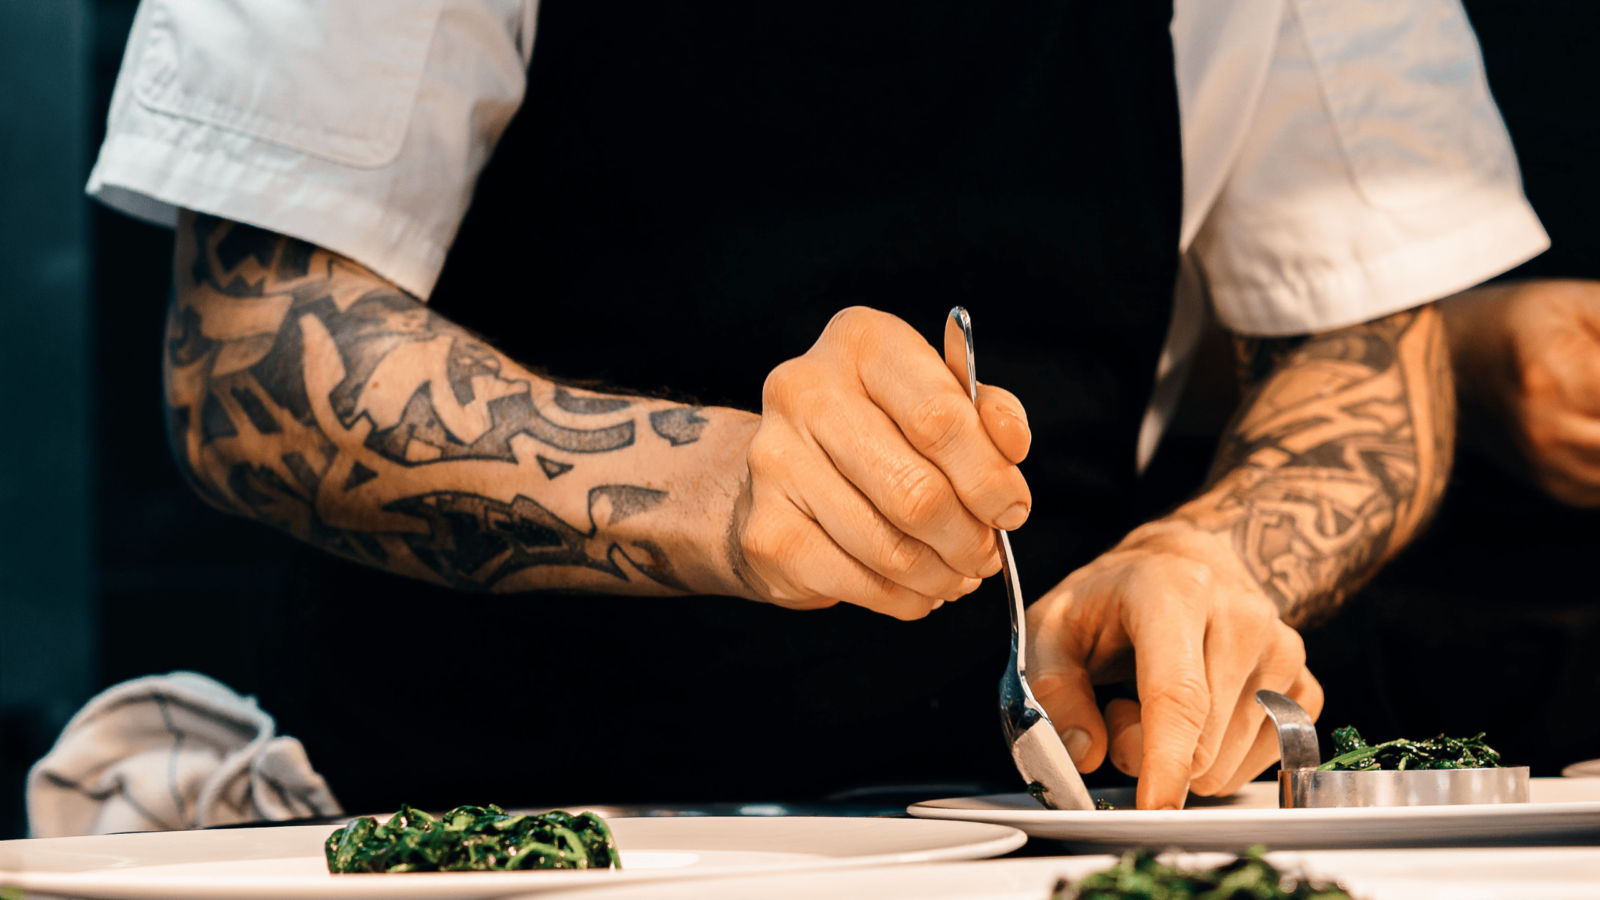 12 of the most famous chefs to follow on Instagram